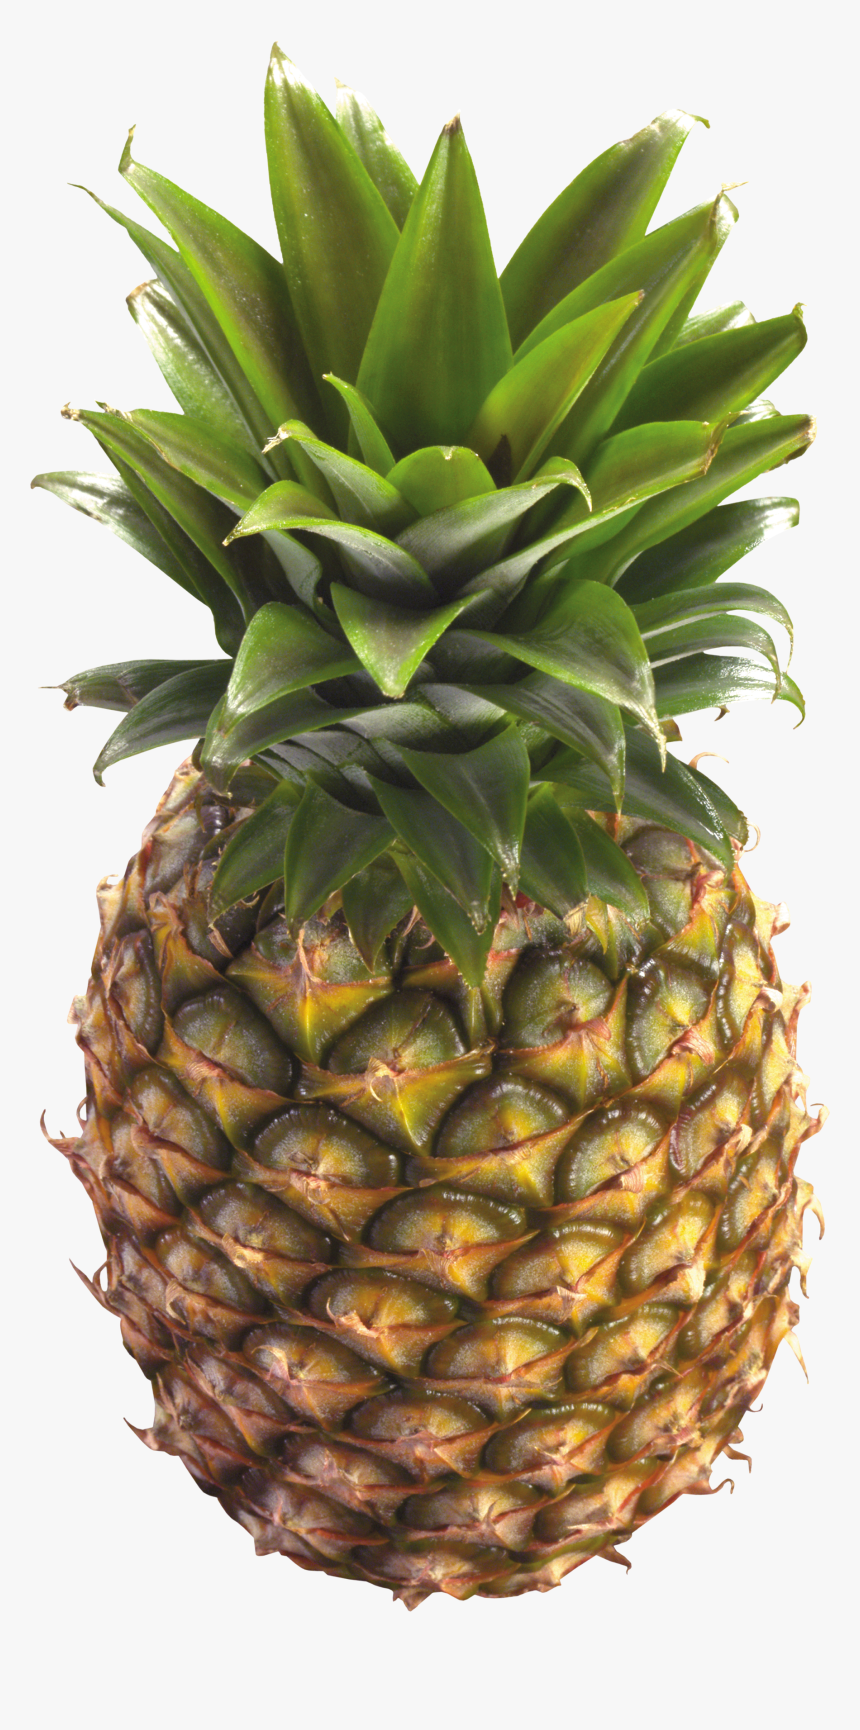 Transparent Pineapple Png, Png Download, Free Download